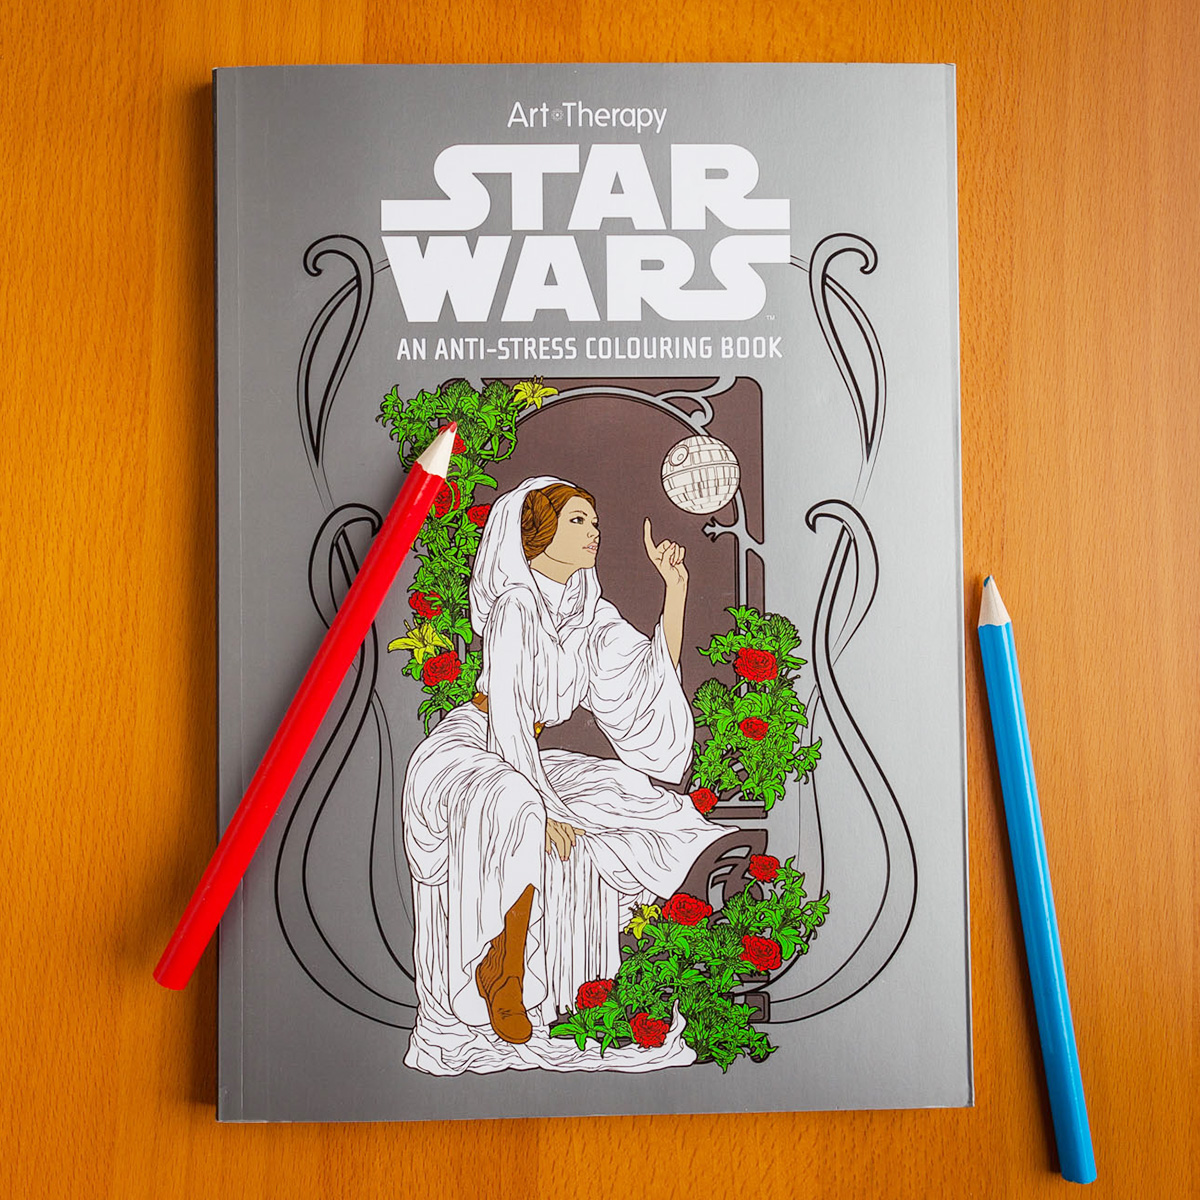 Cahier de coloriages Star Wars Therapy 14 95 €